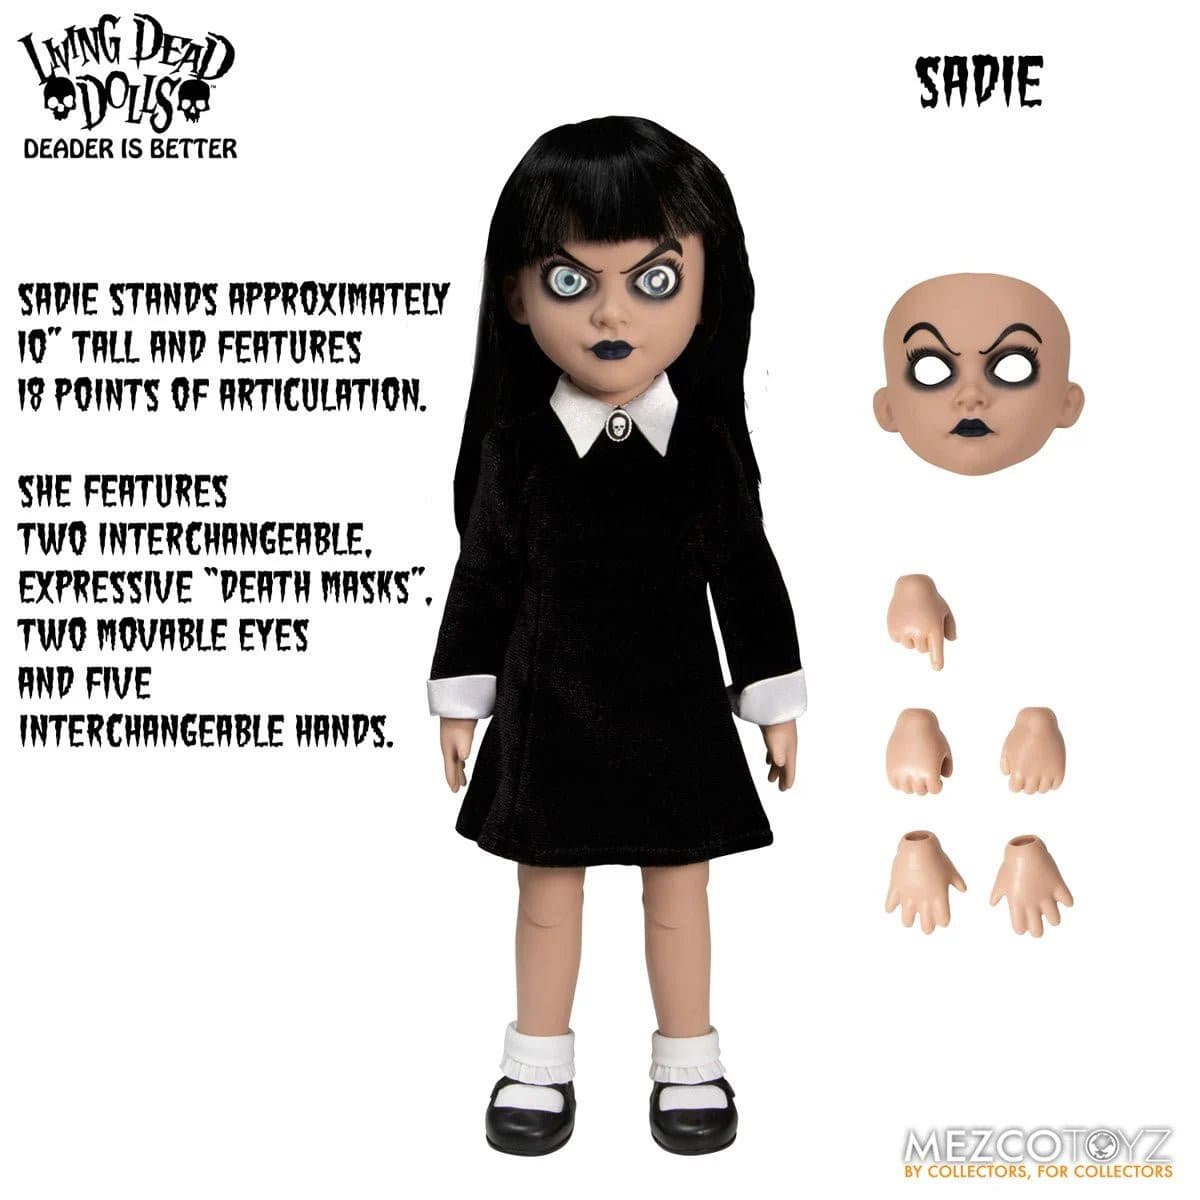 LIVING DEAD DOLLS Presents Sadie 10-Inch Doll - Simon's Collectibles